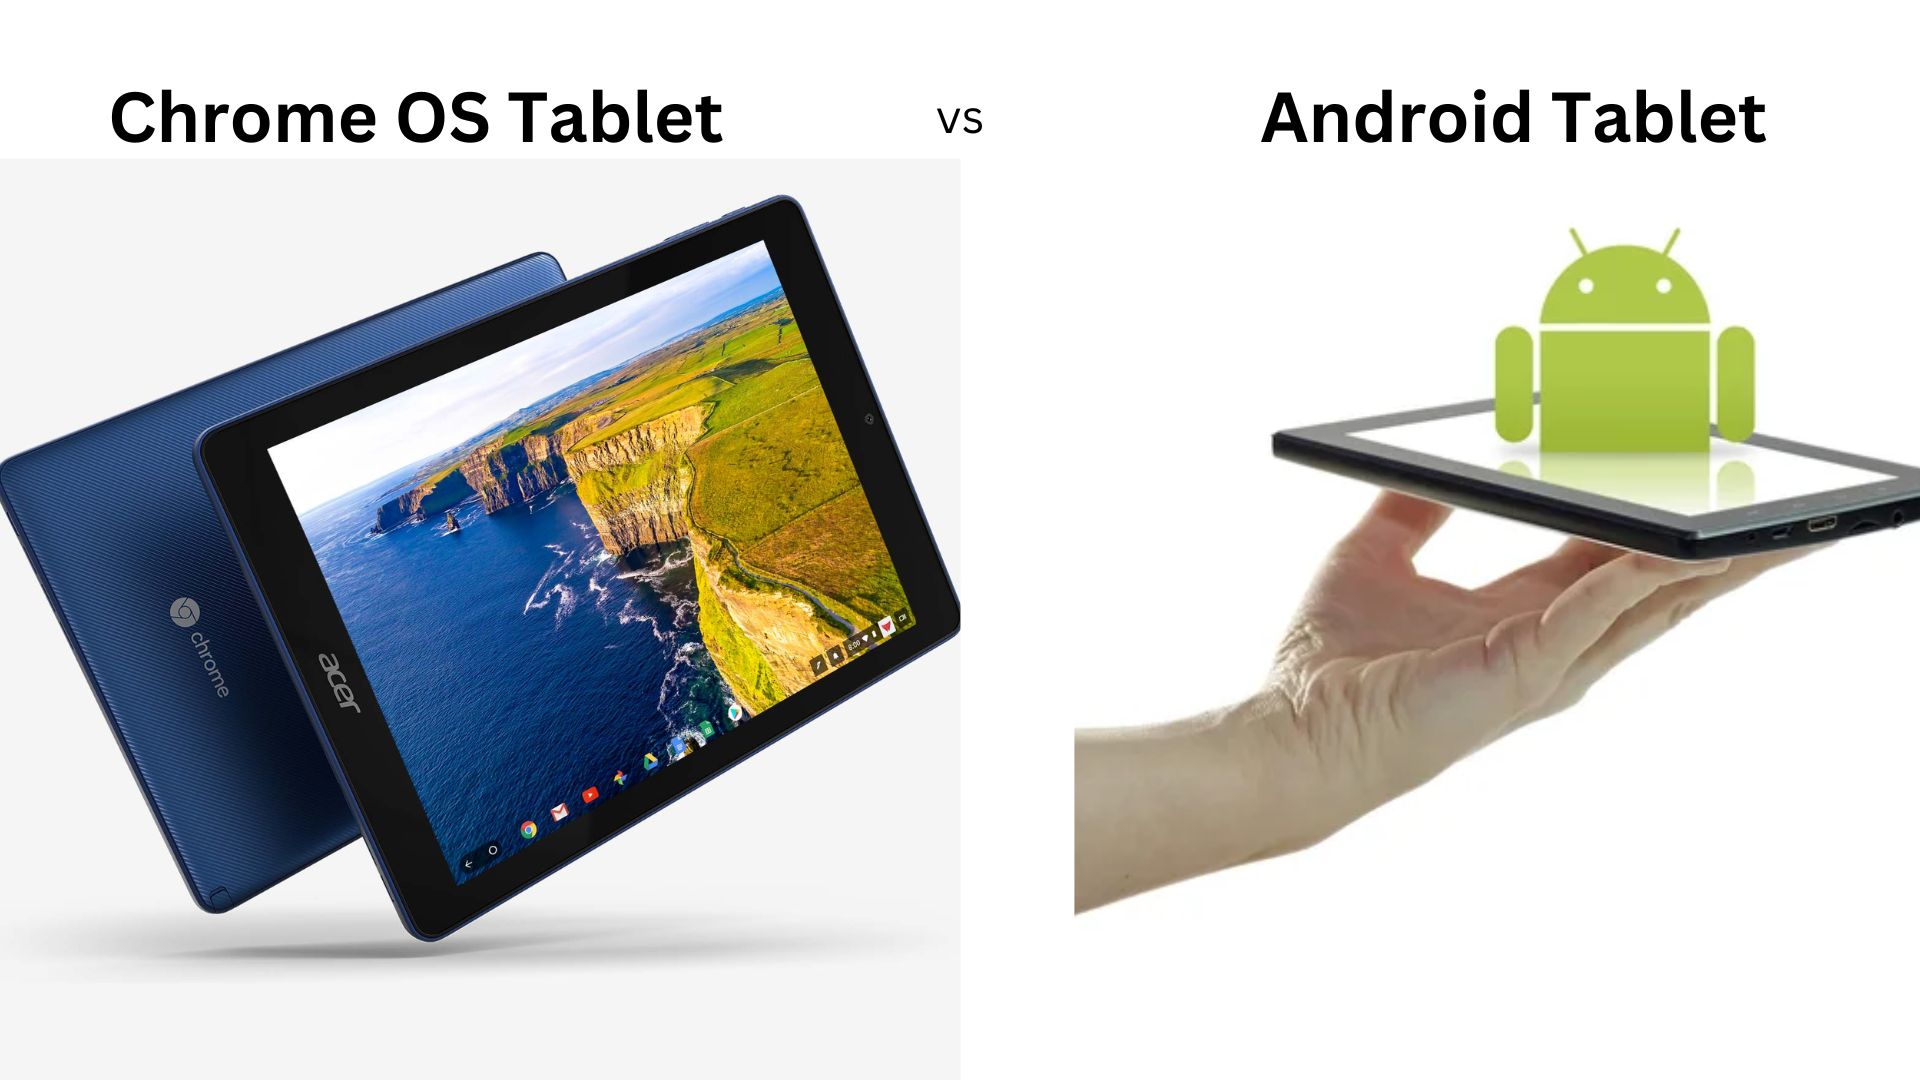 Chrome OS tablet vs Android tablet